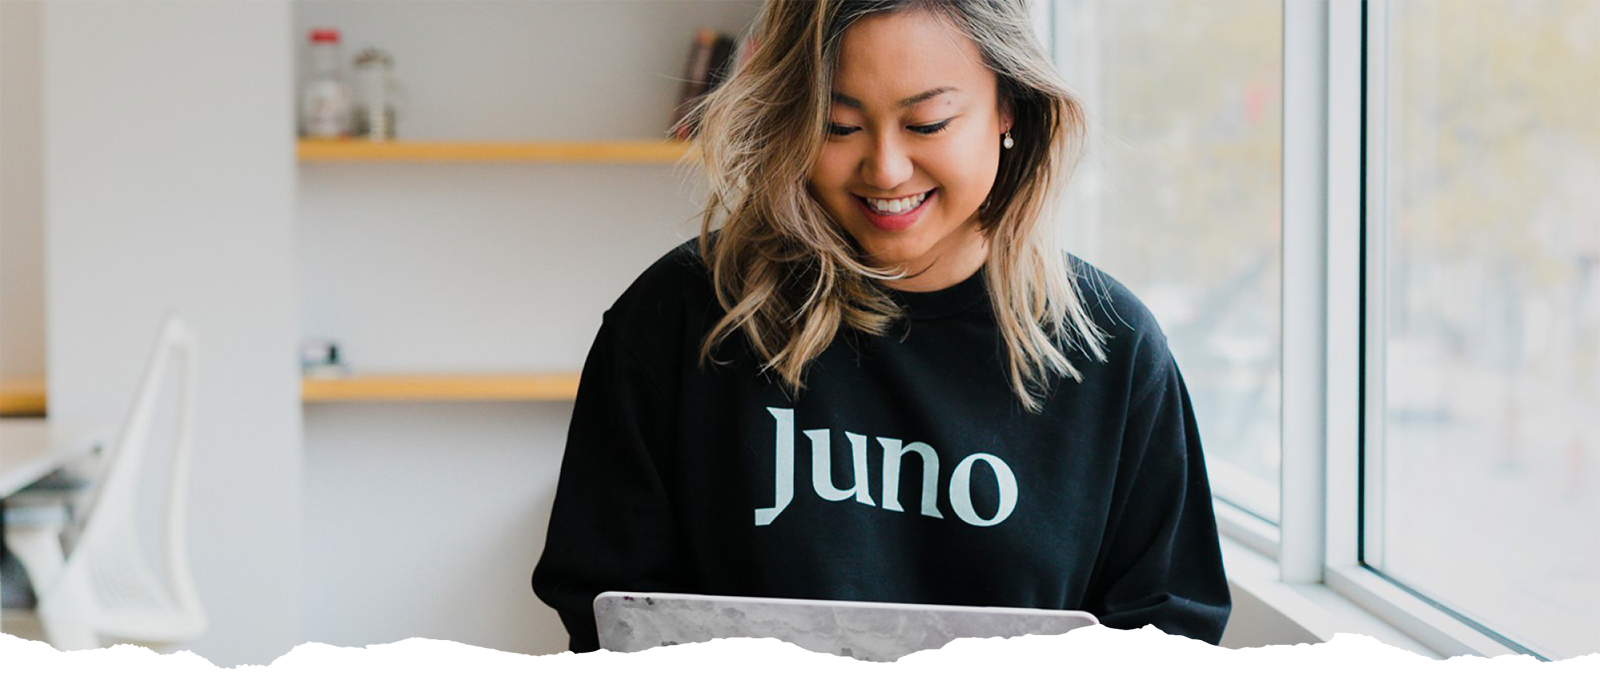 Young woman in Juno College branded sweatshirt learning at the Toronto campus